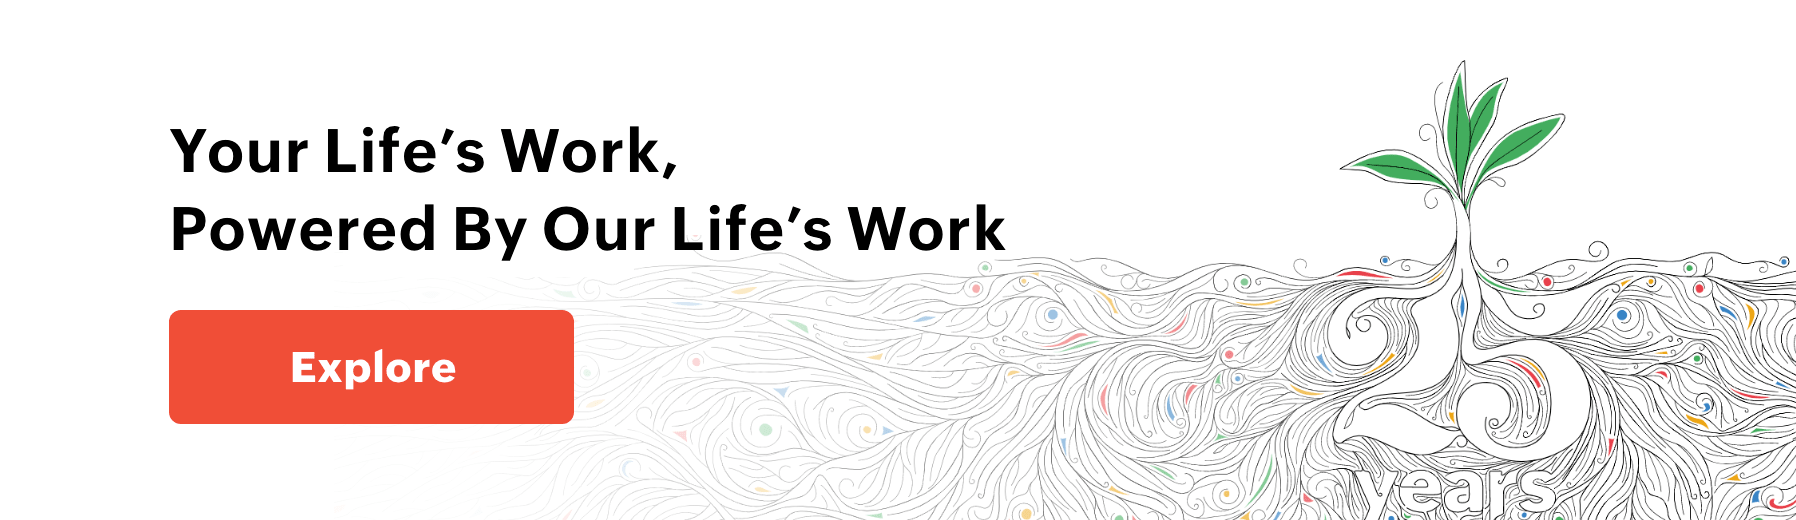 Your Life’s Work, Powered By Our Life’s Work